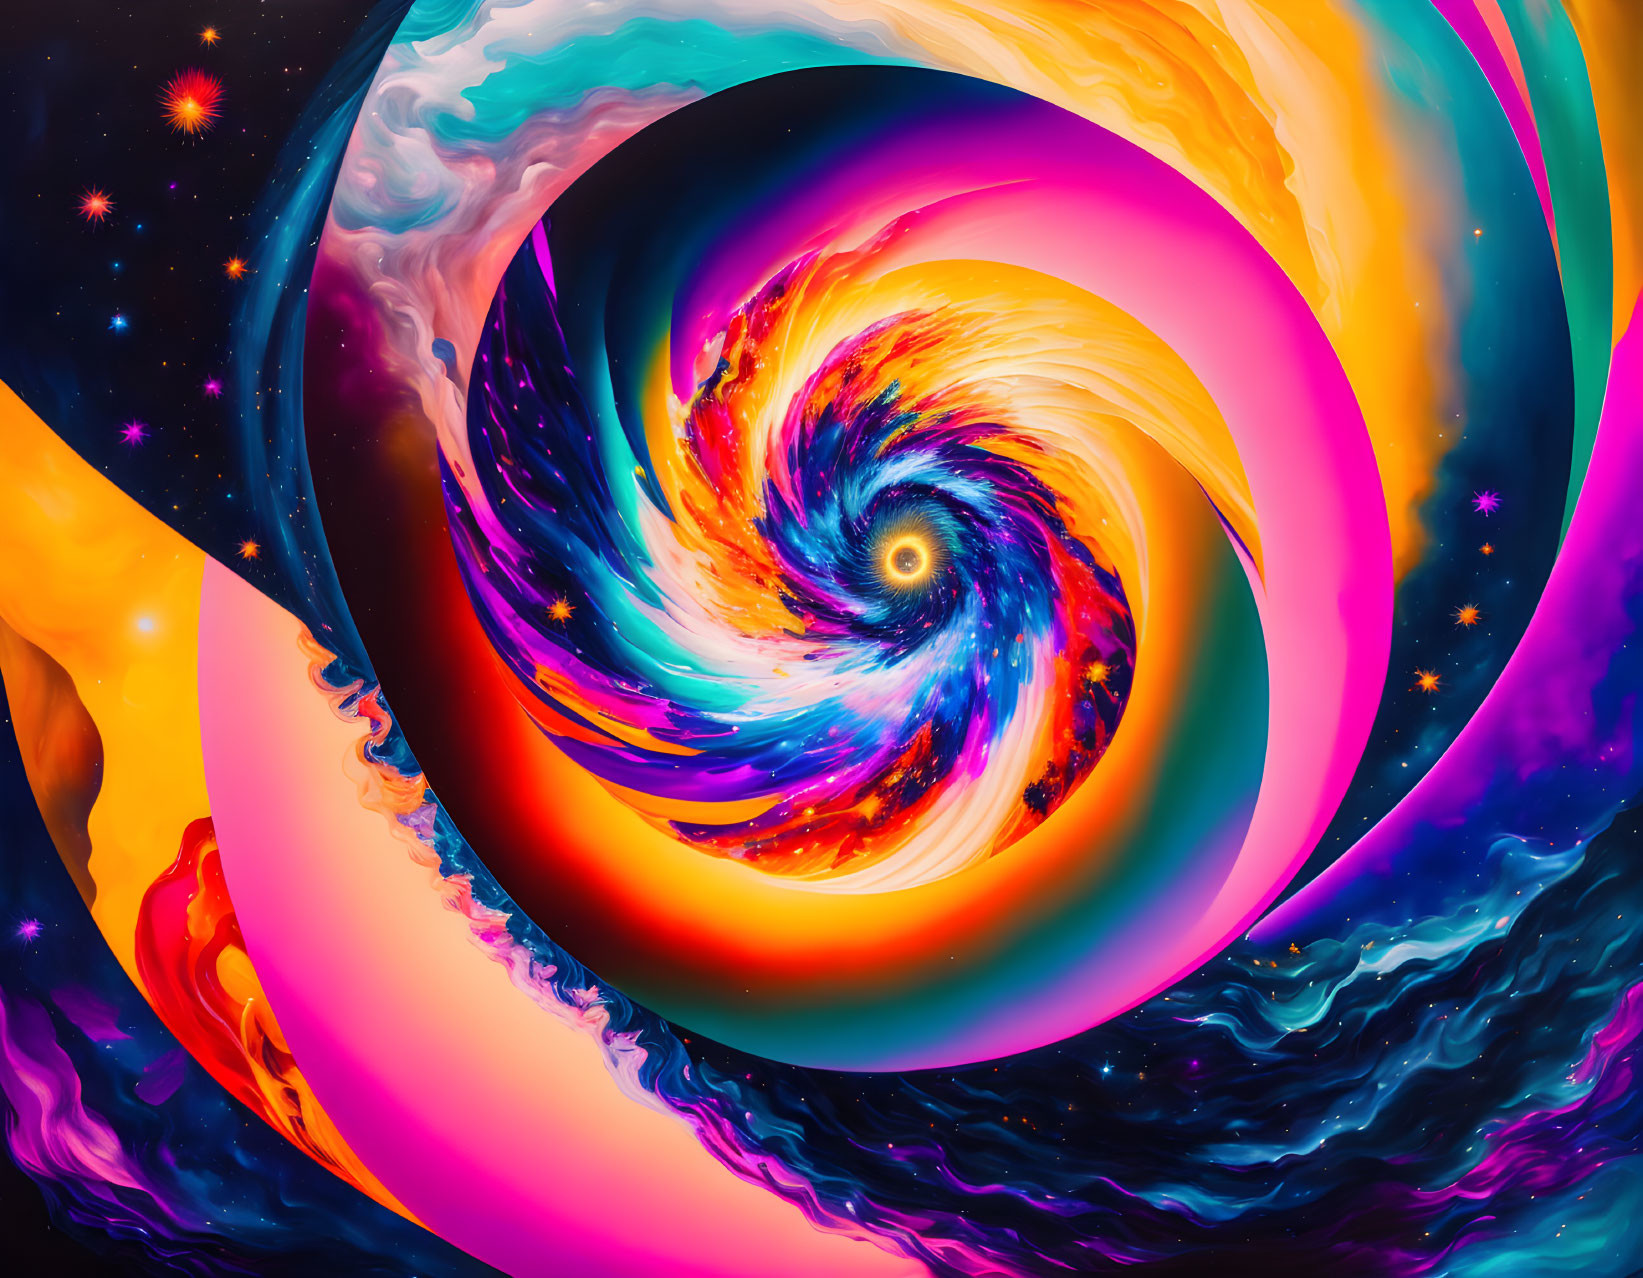 Colorful Abstract Digital Artwork: Swirling Cosmic Vortex in Neon Hues